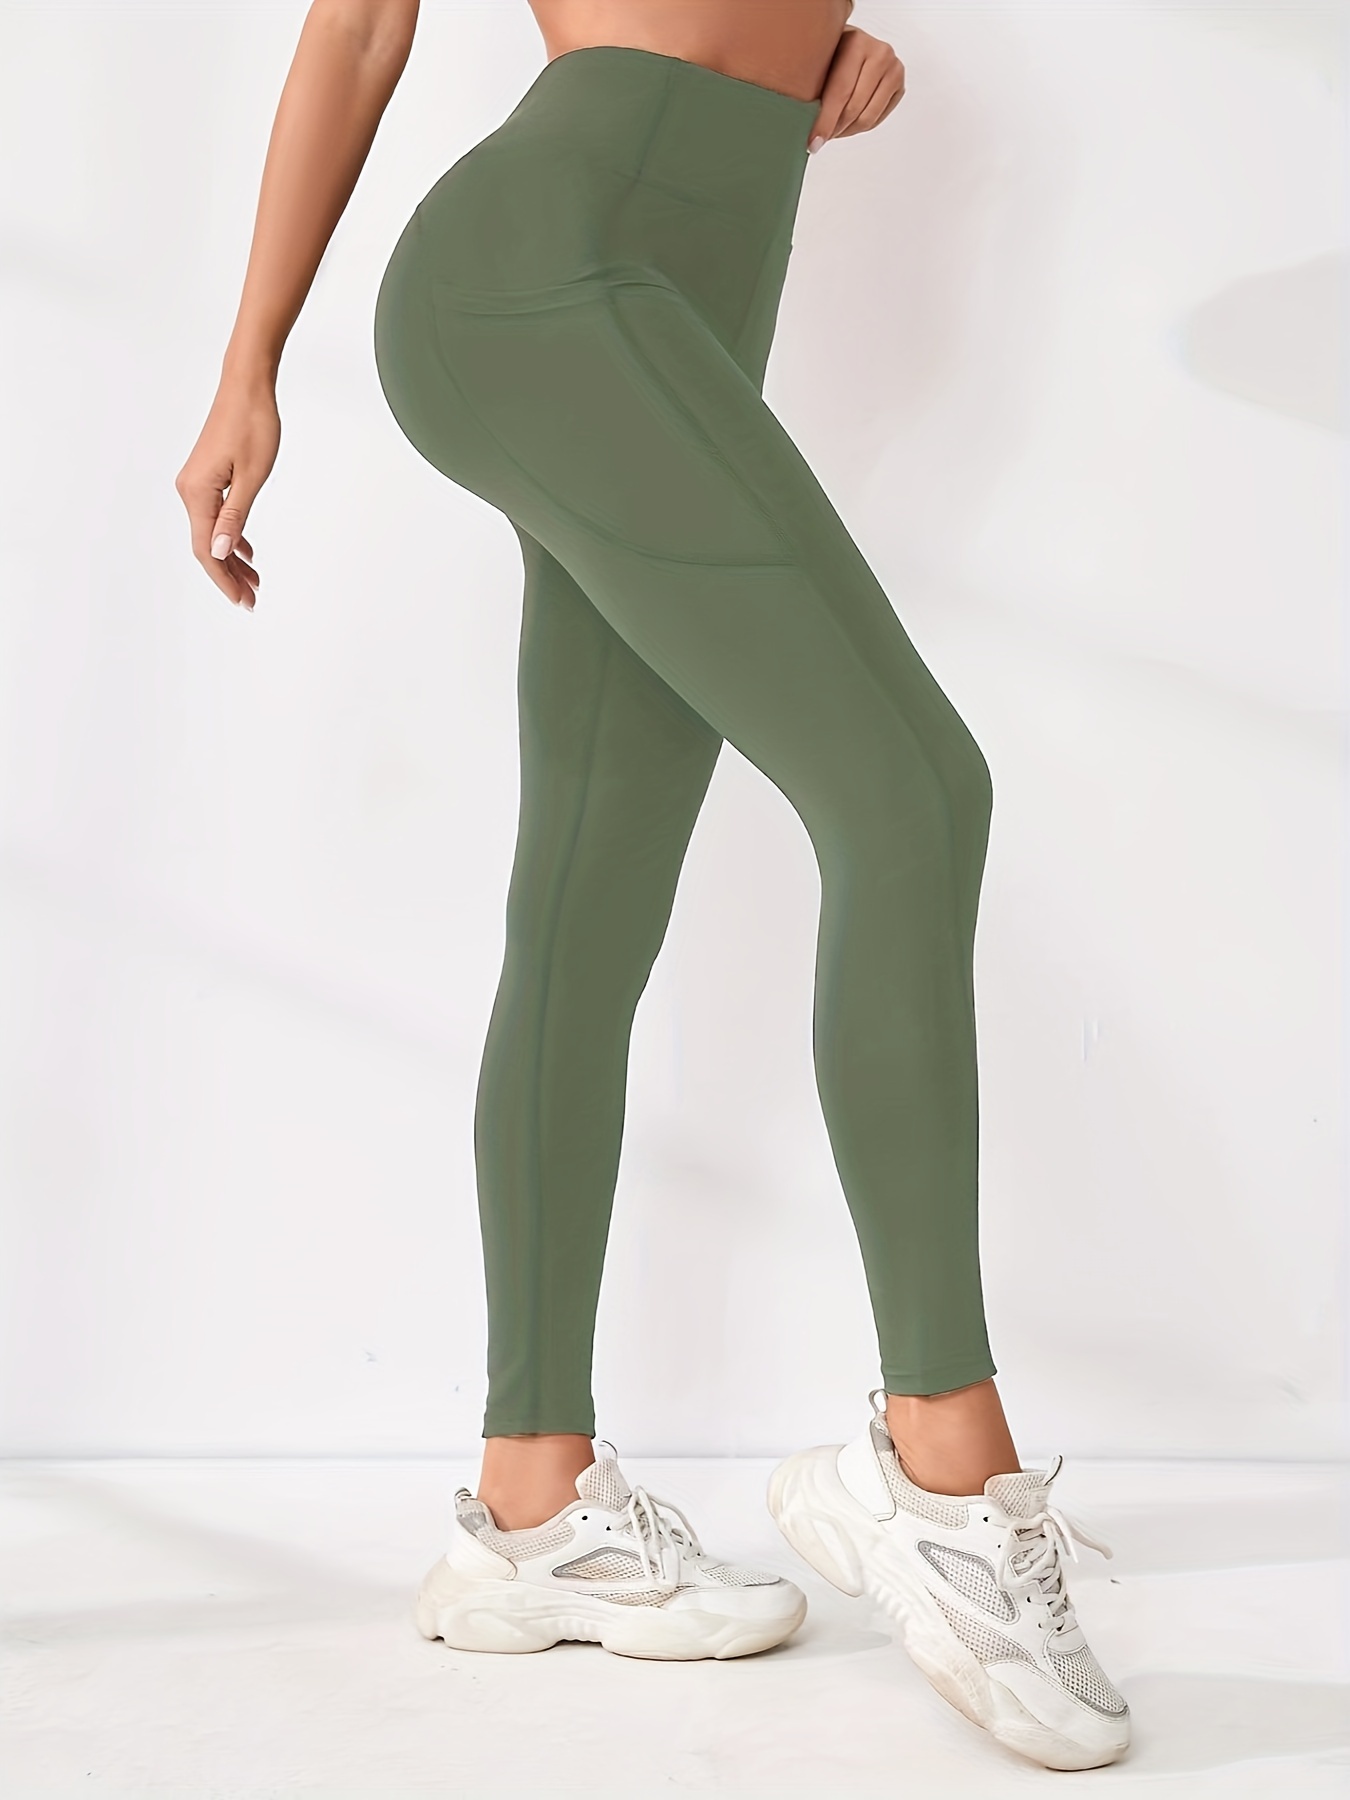 gROTEEN Leggings for Women with Pockets Butt Lift High Waisted